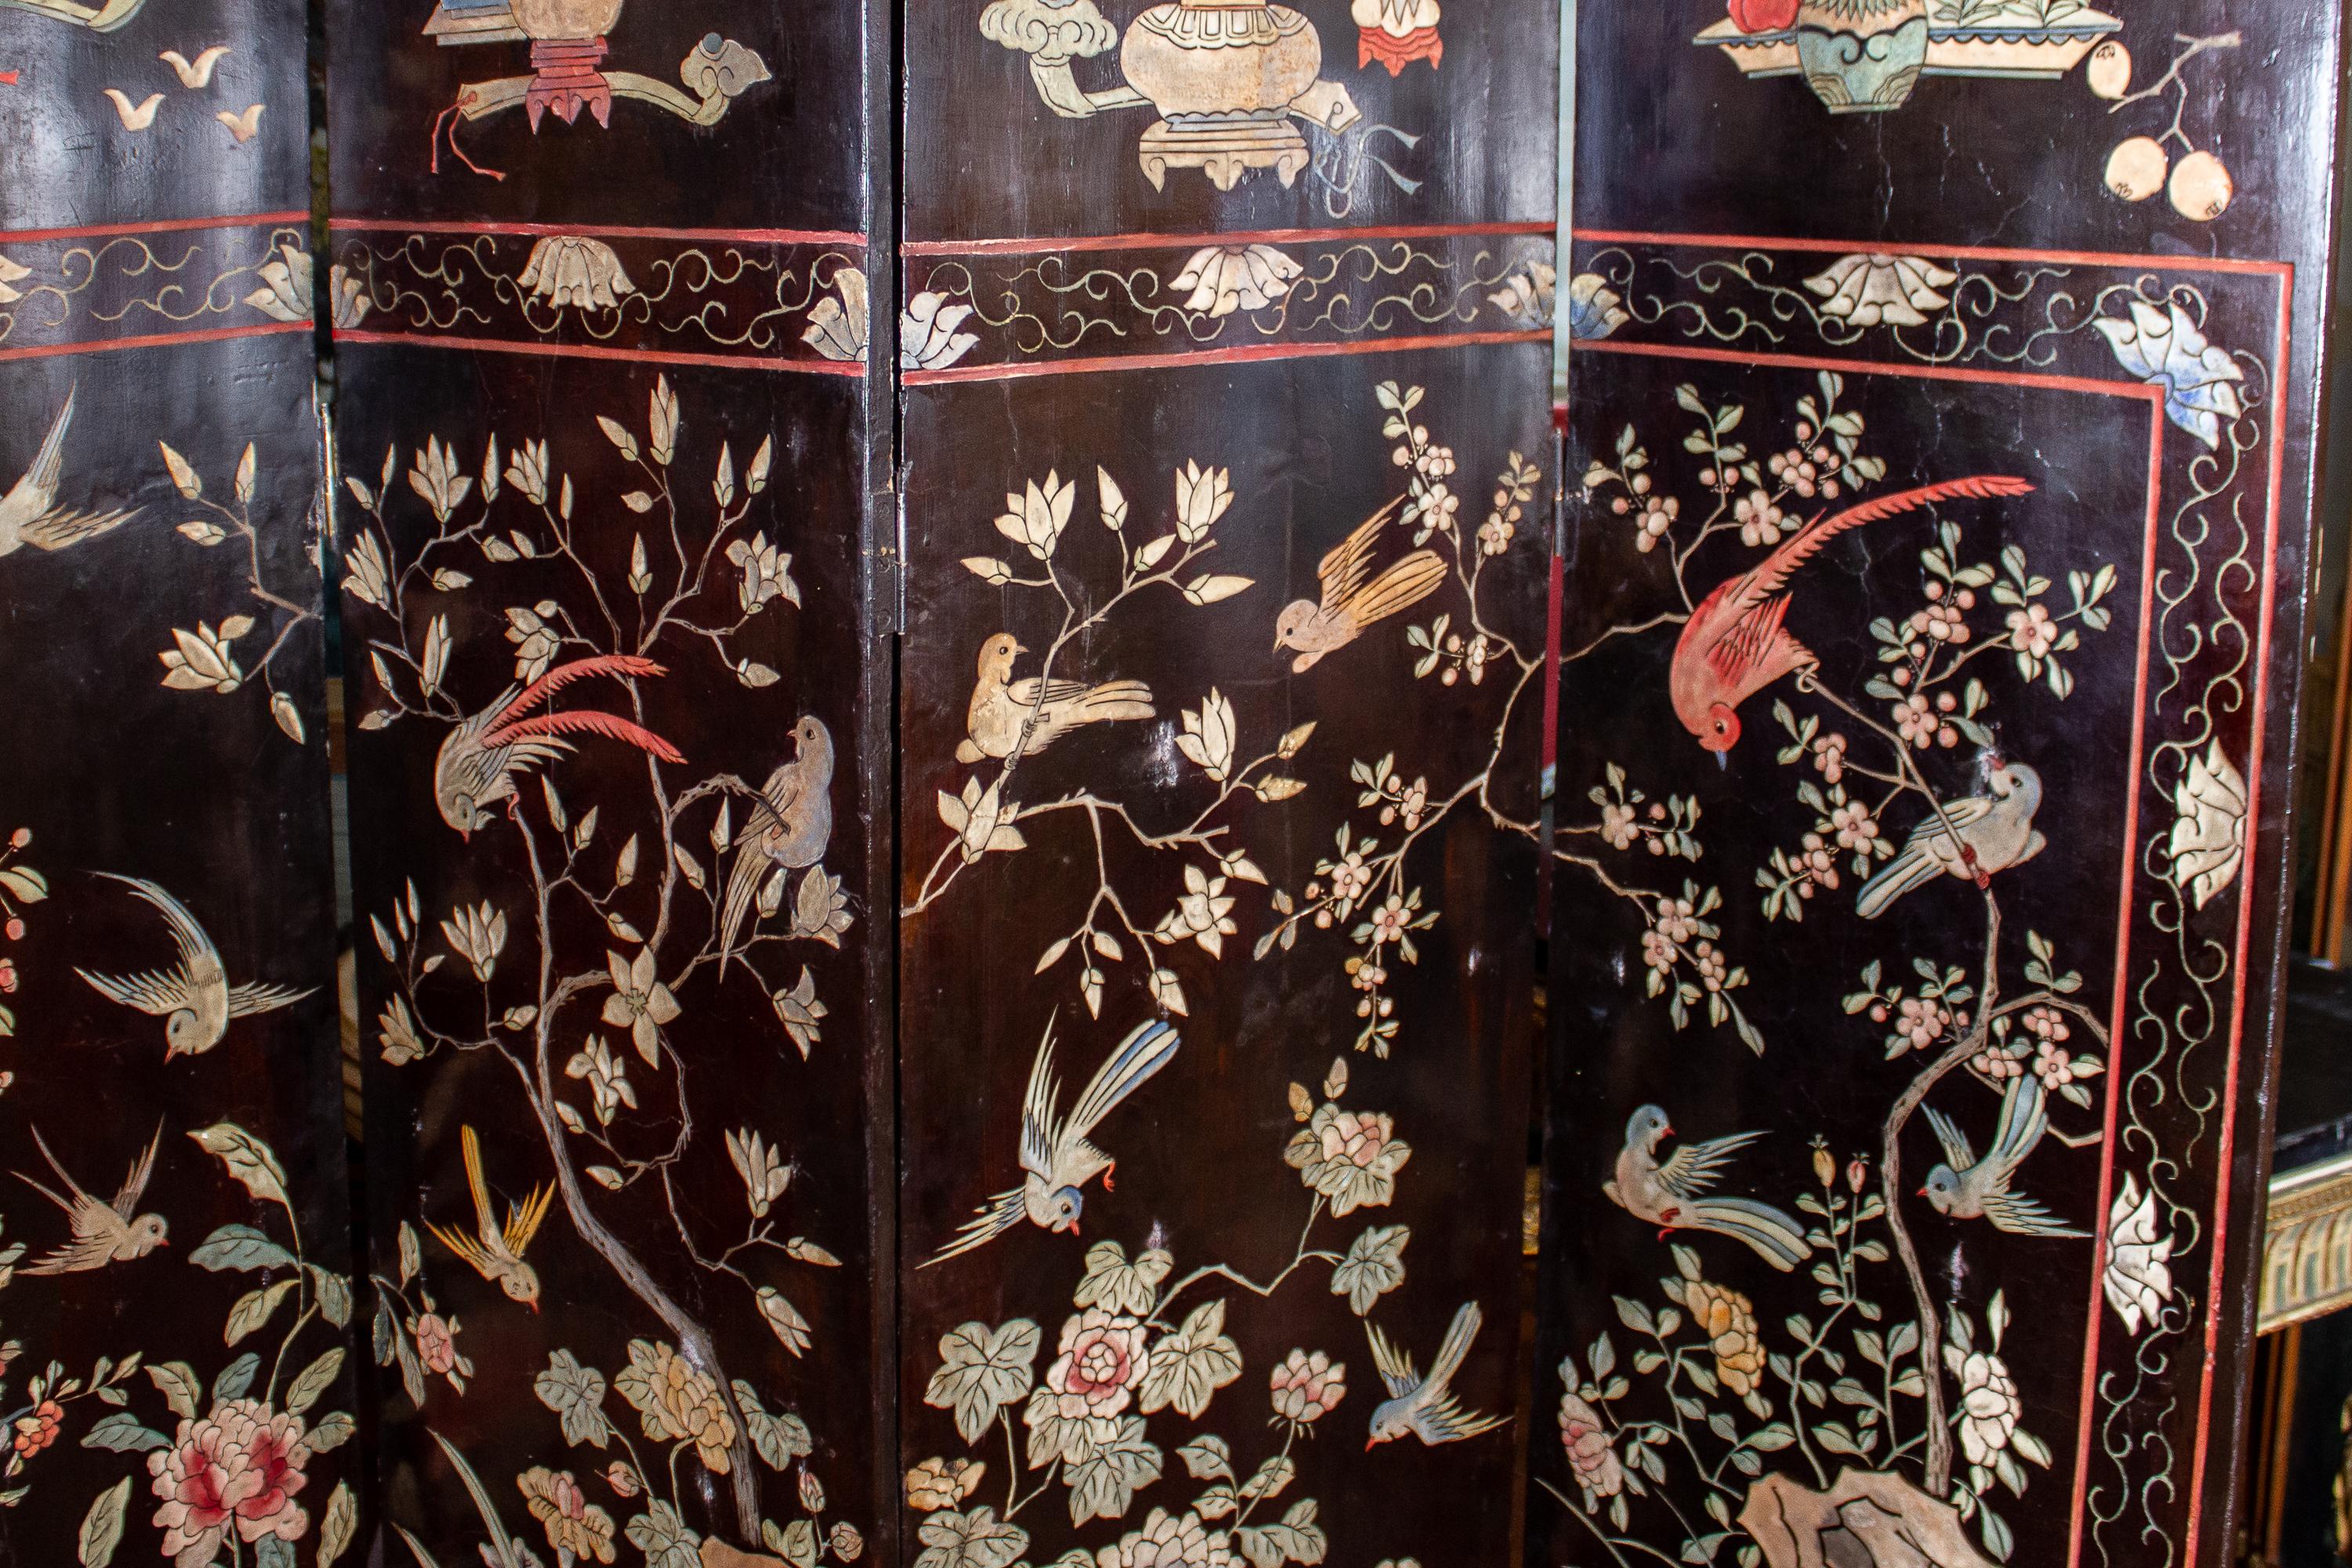 Outstanding double -sided eight dark Coromandel screen is decorated with polychrome landscape, detailed village scenes showing foliage, housing, walkways, and people -engaged in a variety of activities. The screen features a border with foliage,